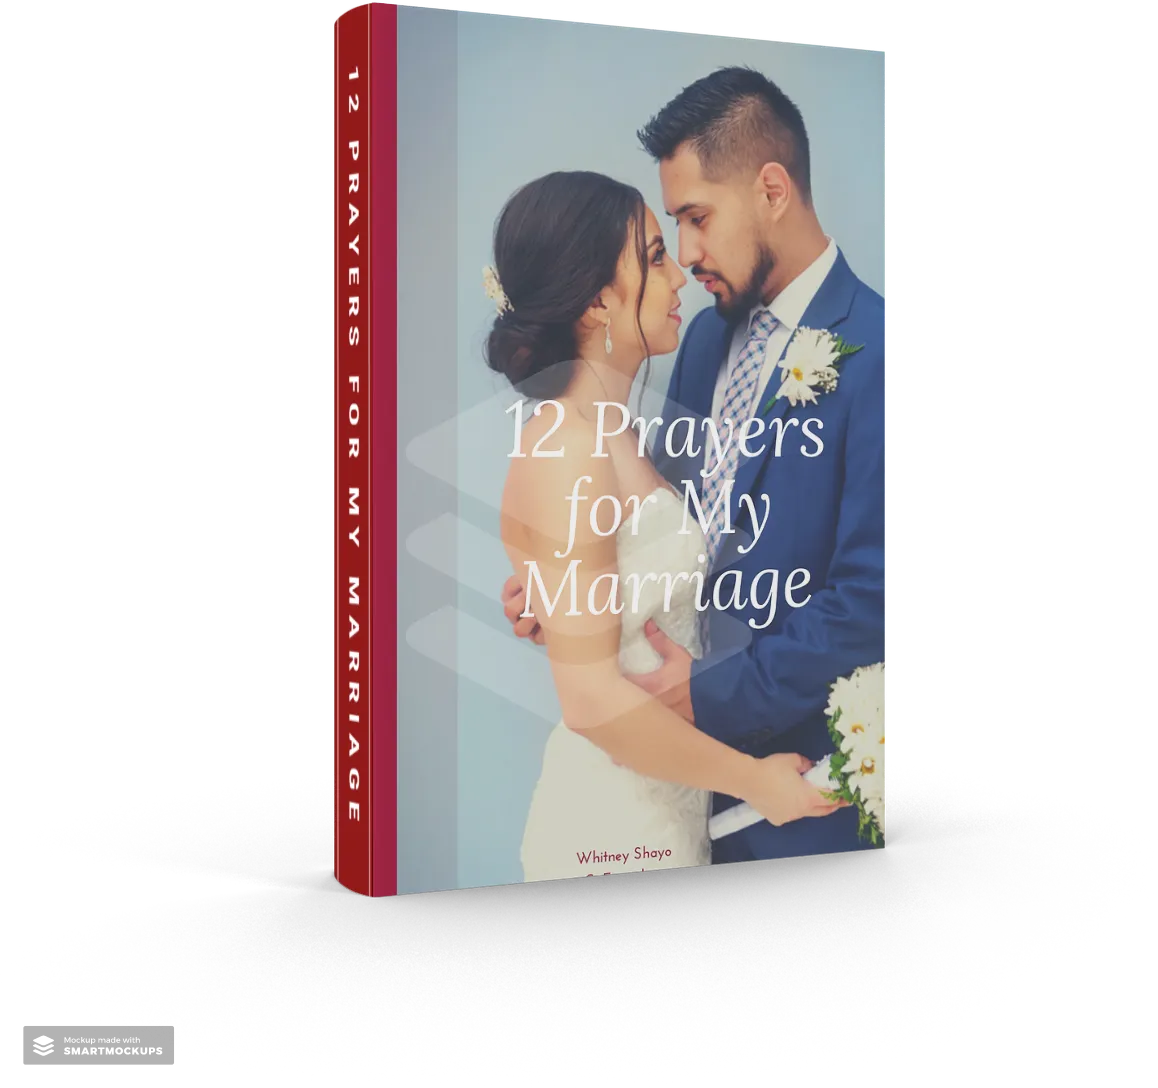 12 Prayers for my marriage